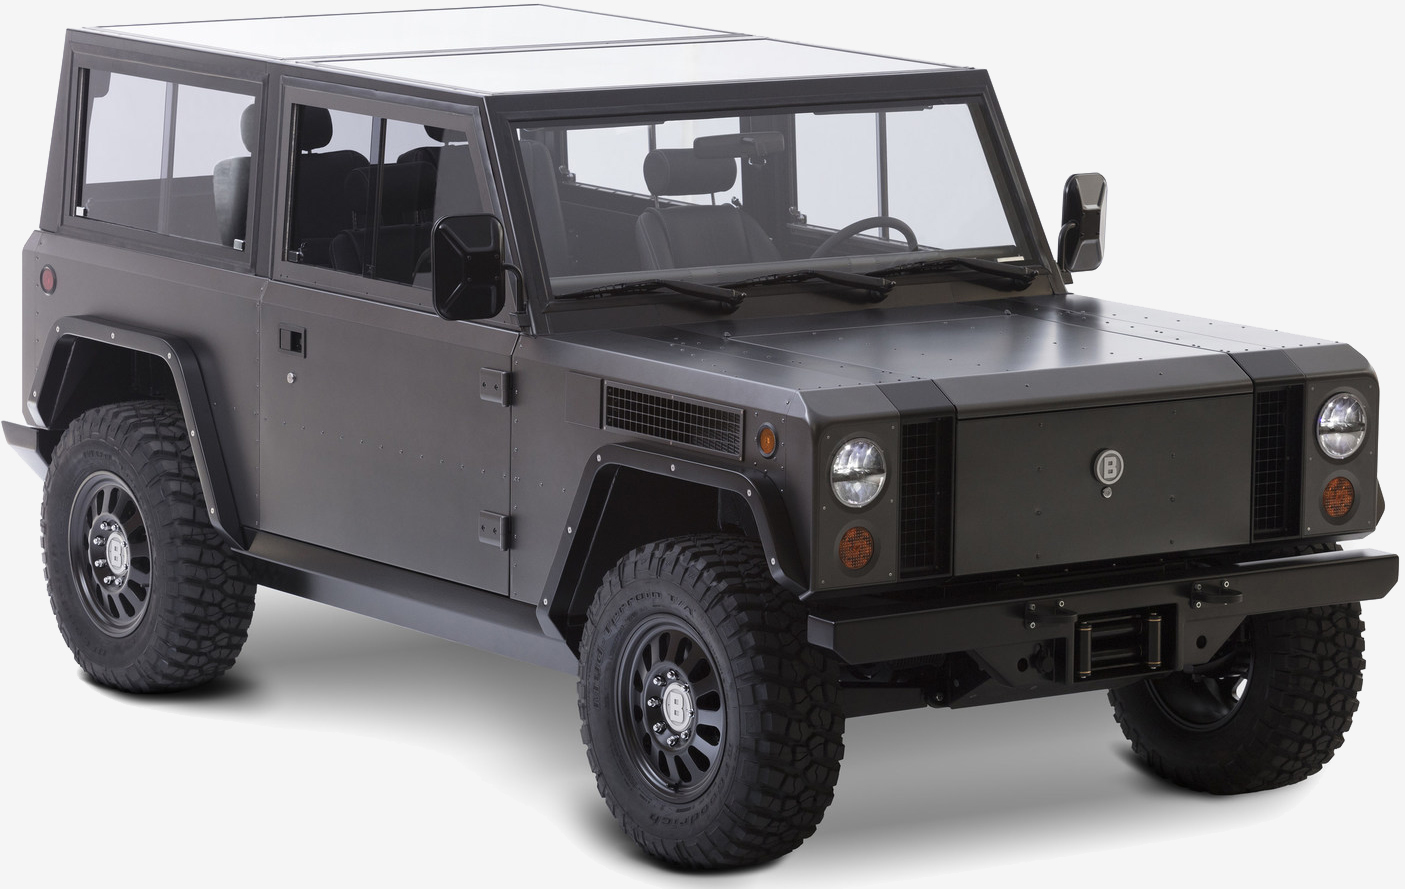 The Bollinger B1 is an all-electric, all-wheel drive sport utility truck boasting 360 HP and up to 200 miles of range